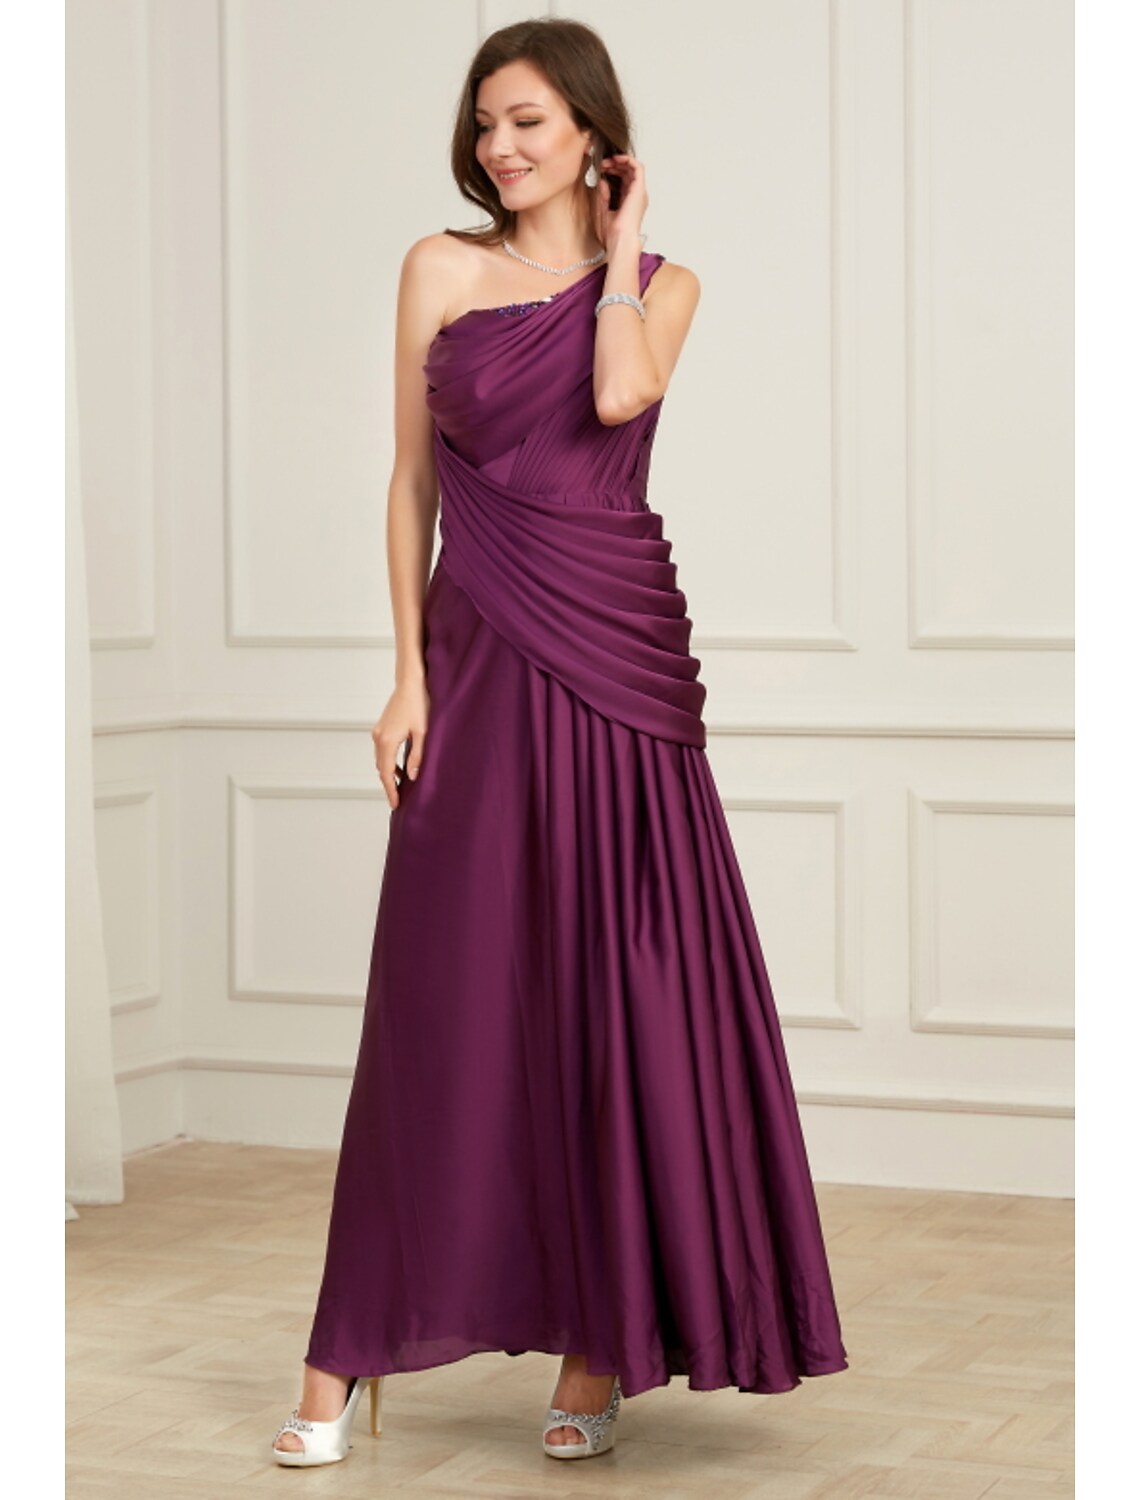 A-Line Evening Gown Elegant Dress Wedding Floor Length Sleeveless One Shoulder Polyester with Pleats Ruched